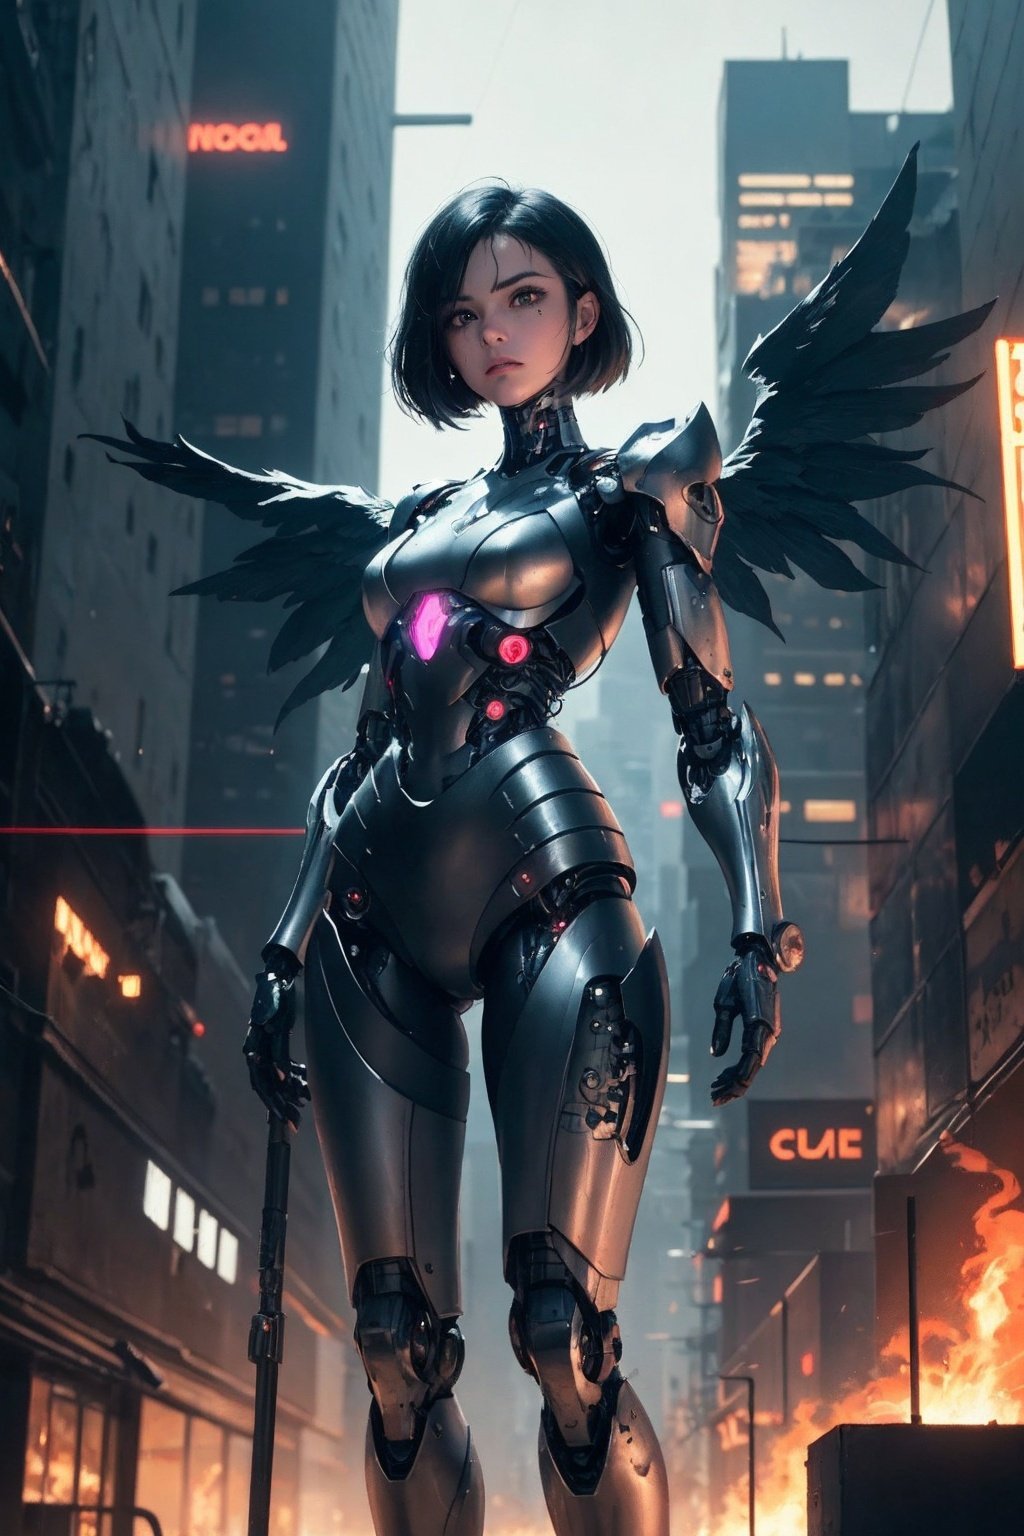 (8k), highly detailed face,masterpiece, pretty girl, gigantic black cyborg wings, wings have neon lights, wings spread,, in tight metal armor, metal belt, electronic armor elements, 20yo, skin below suit has glowing lines, shoulder length black hair, one cyborg eye, standing upright, serious expression, cinematic lighting, burning cyberpunk city in the distance, flat chest